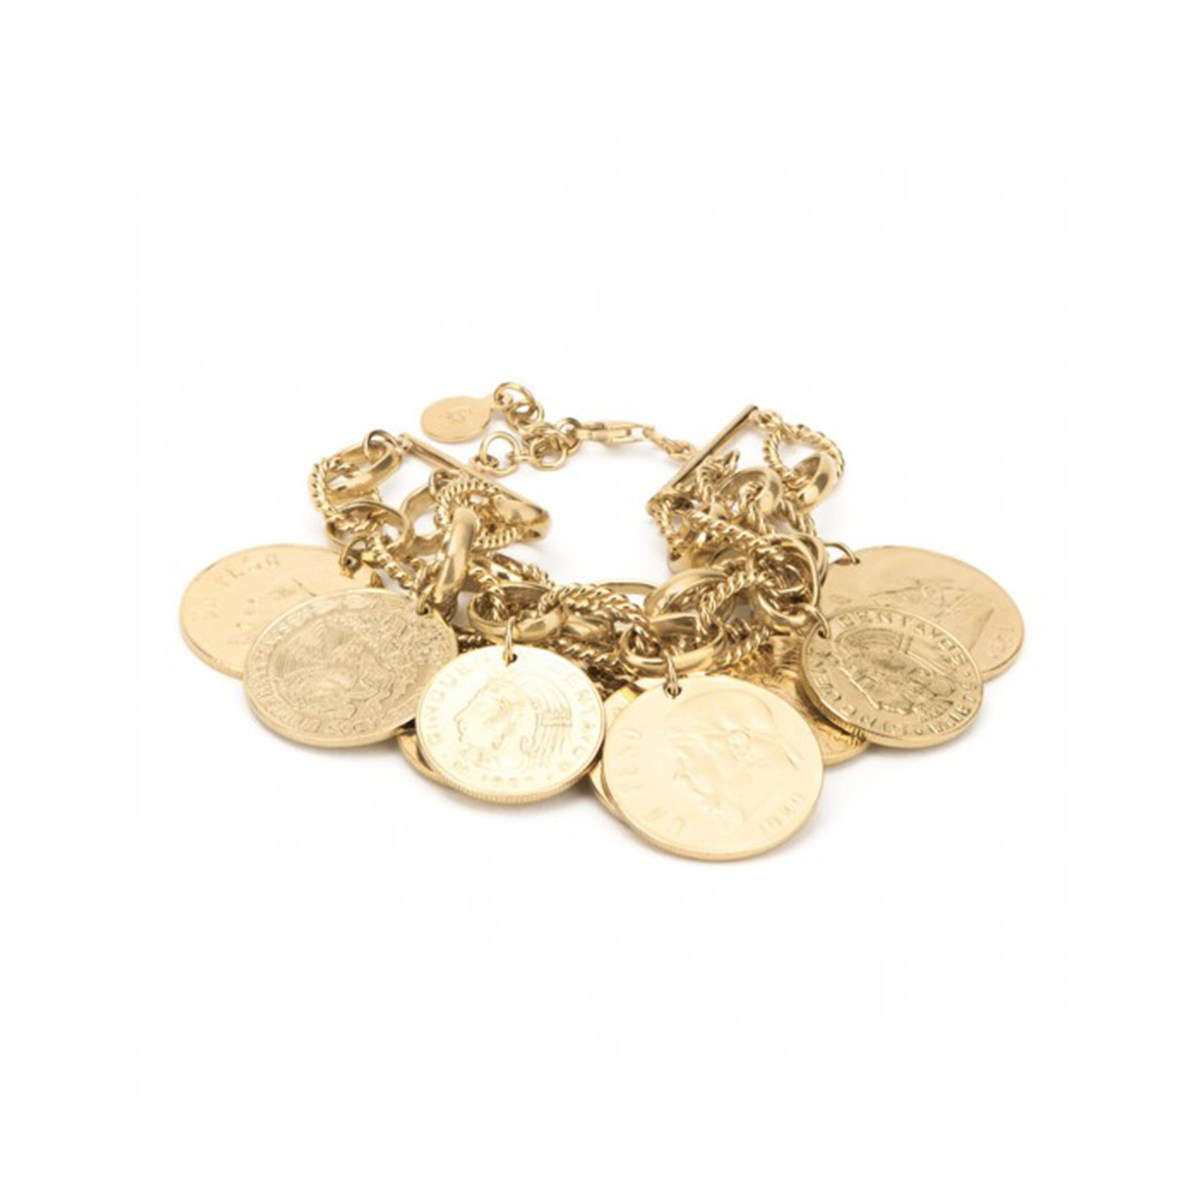 Gold-plated Mexican peso bracelet by Daniel Espinosa